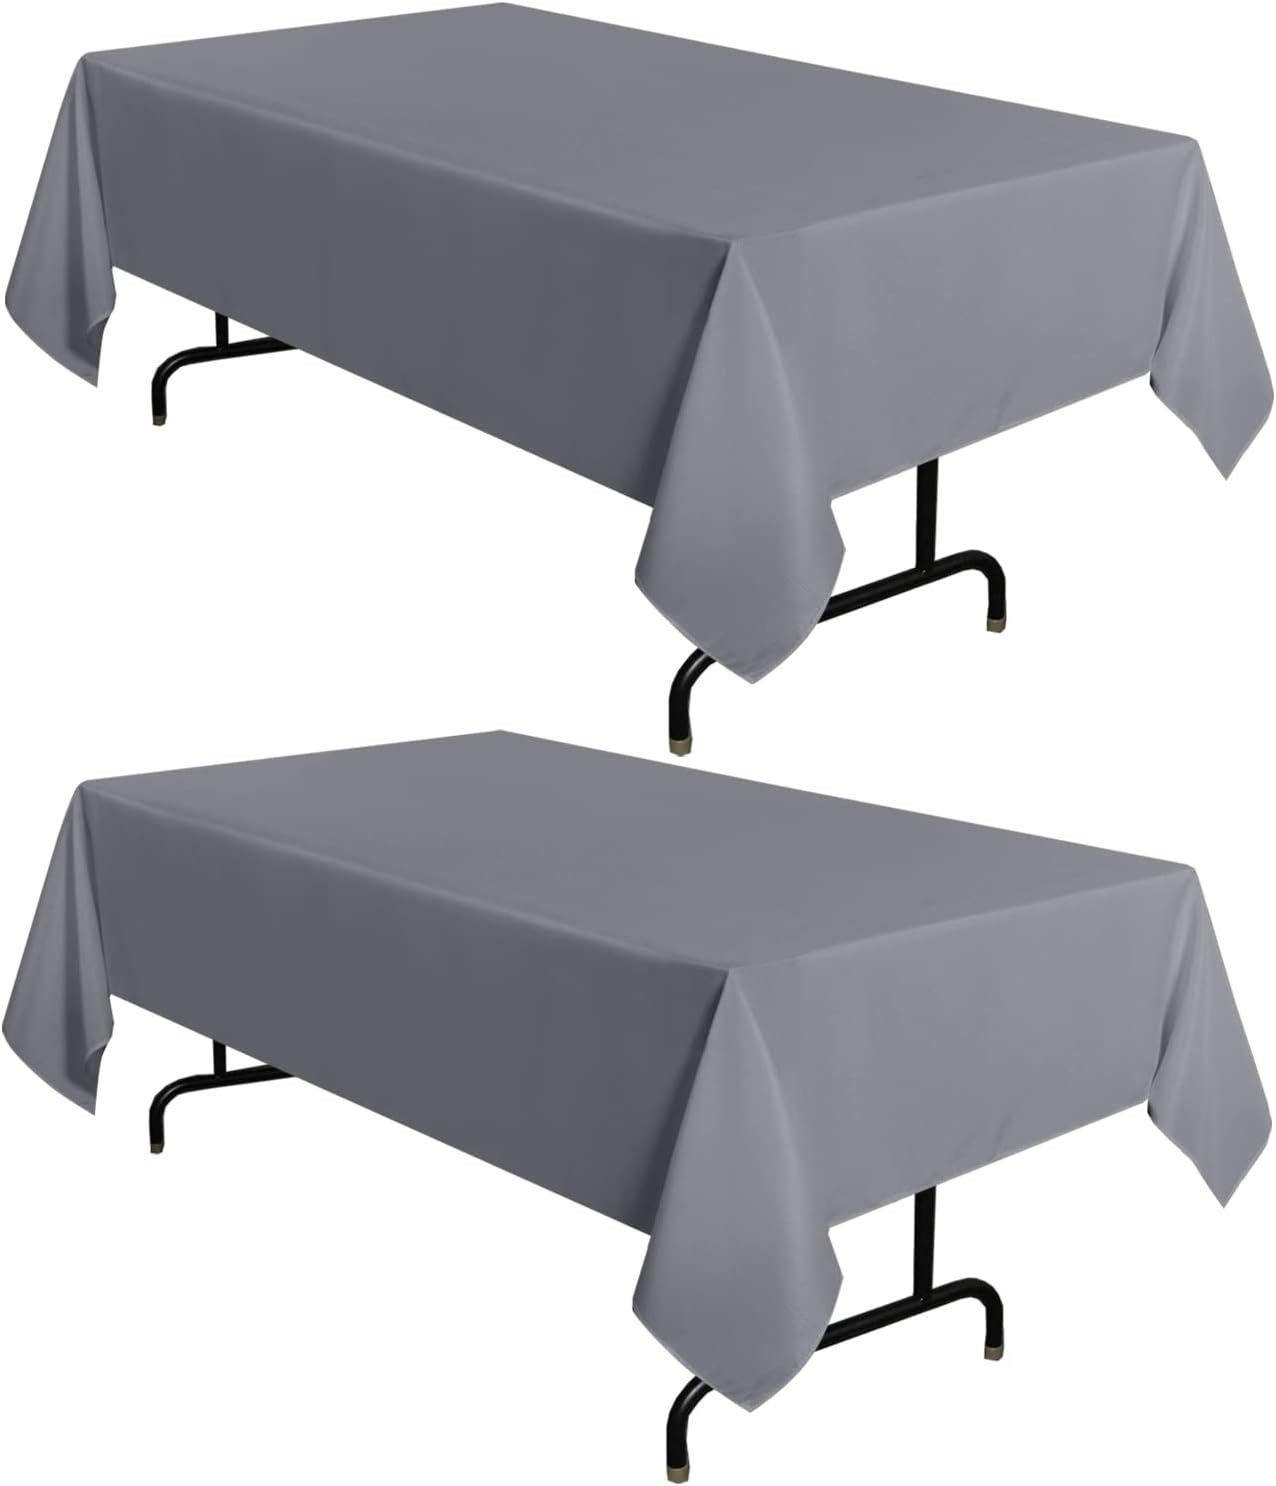 sancua 2 Pack Light Grey Tablecloth 60 x 102 Inch, Rectangle 6 Feet Table Cloth - Stain and Wrinkle Resistant Washable Polyester Table Cover for Dining Table, Buffet Parties and Camping